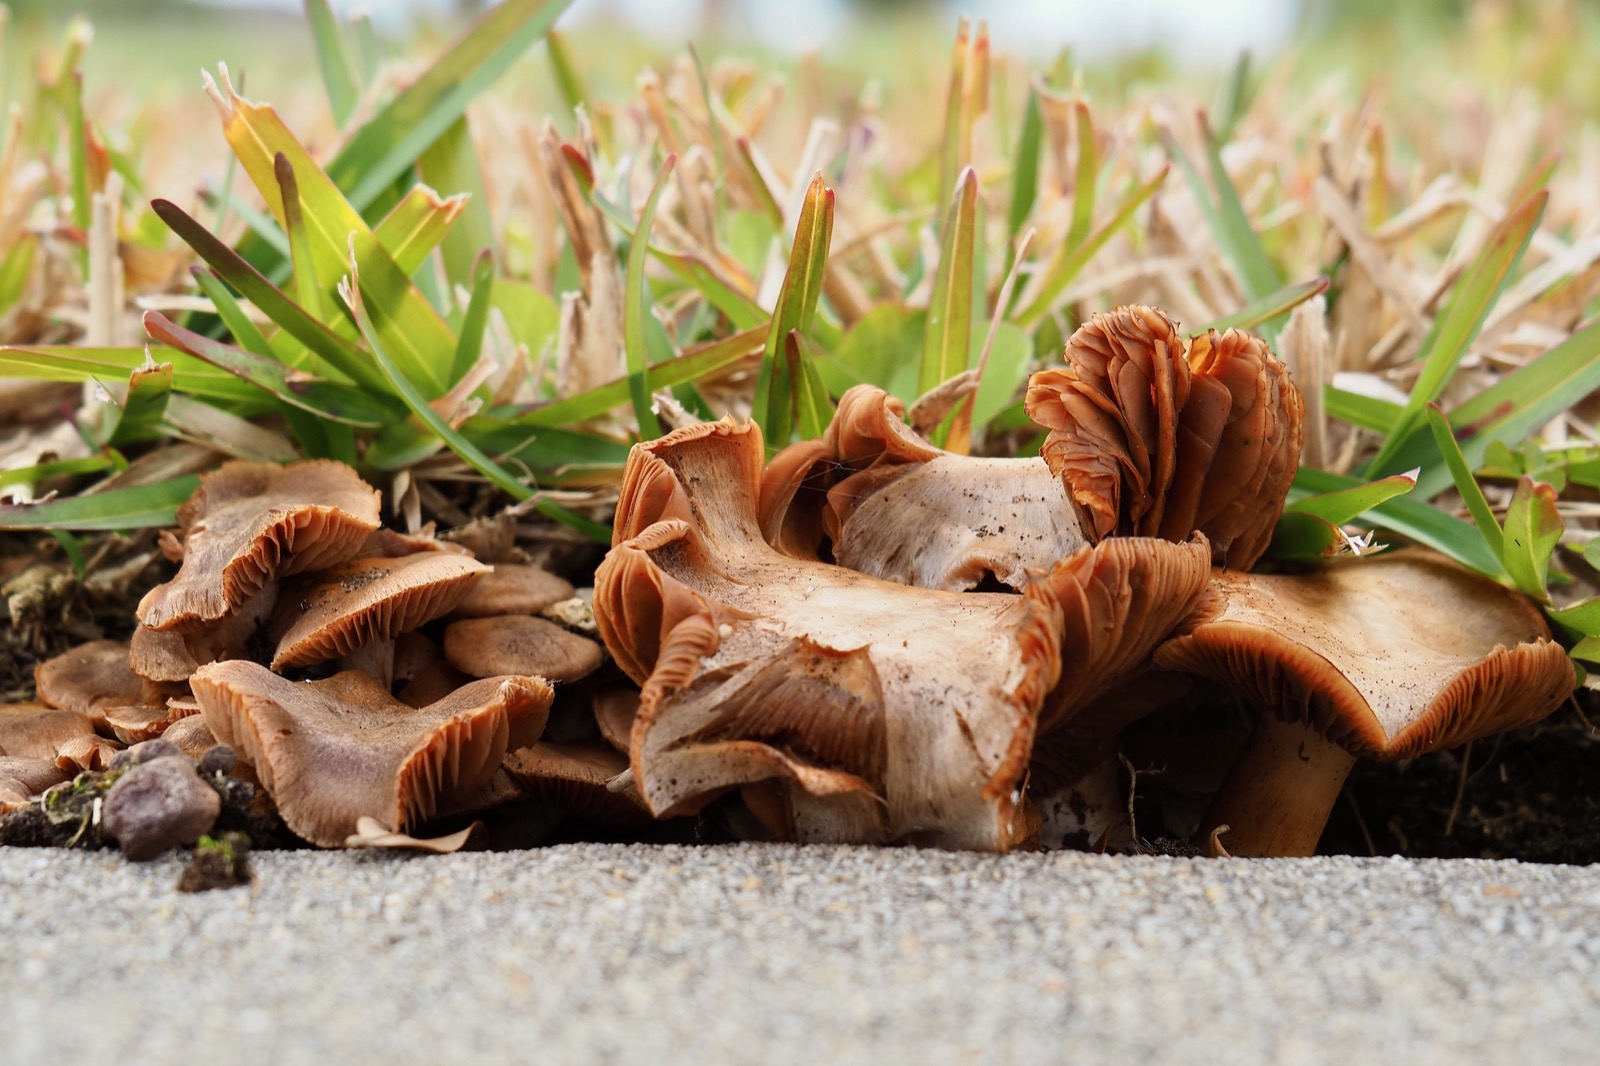 A fungus grows along the margin between the concrete sidewalk and the lawn